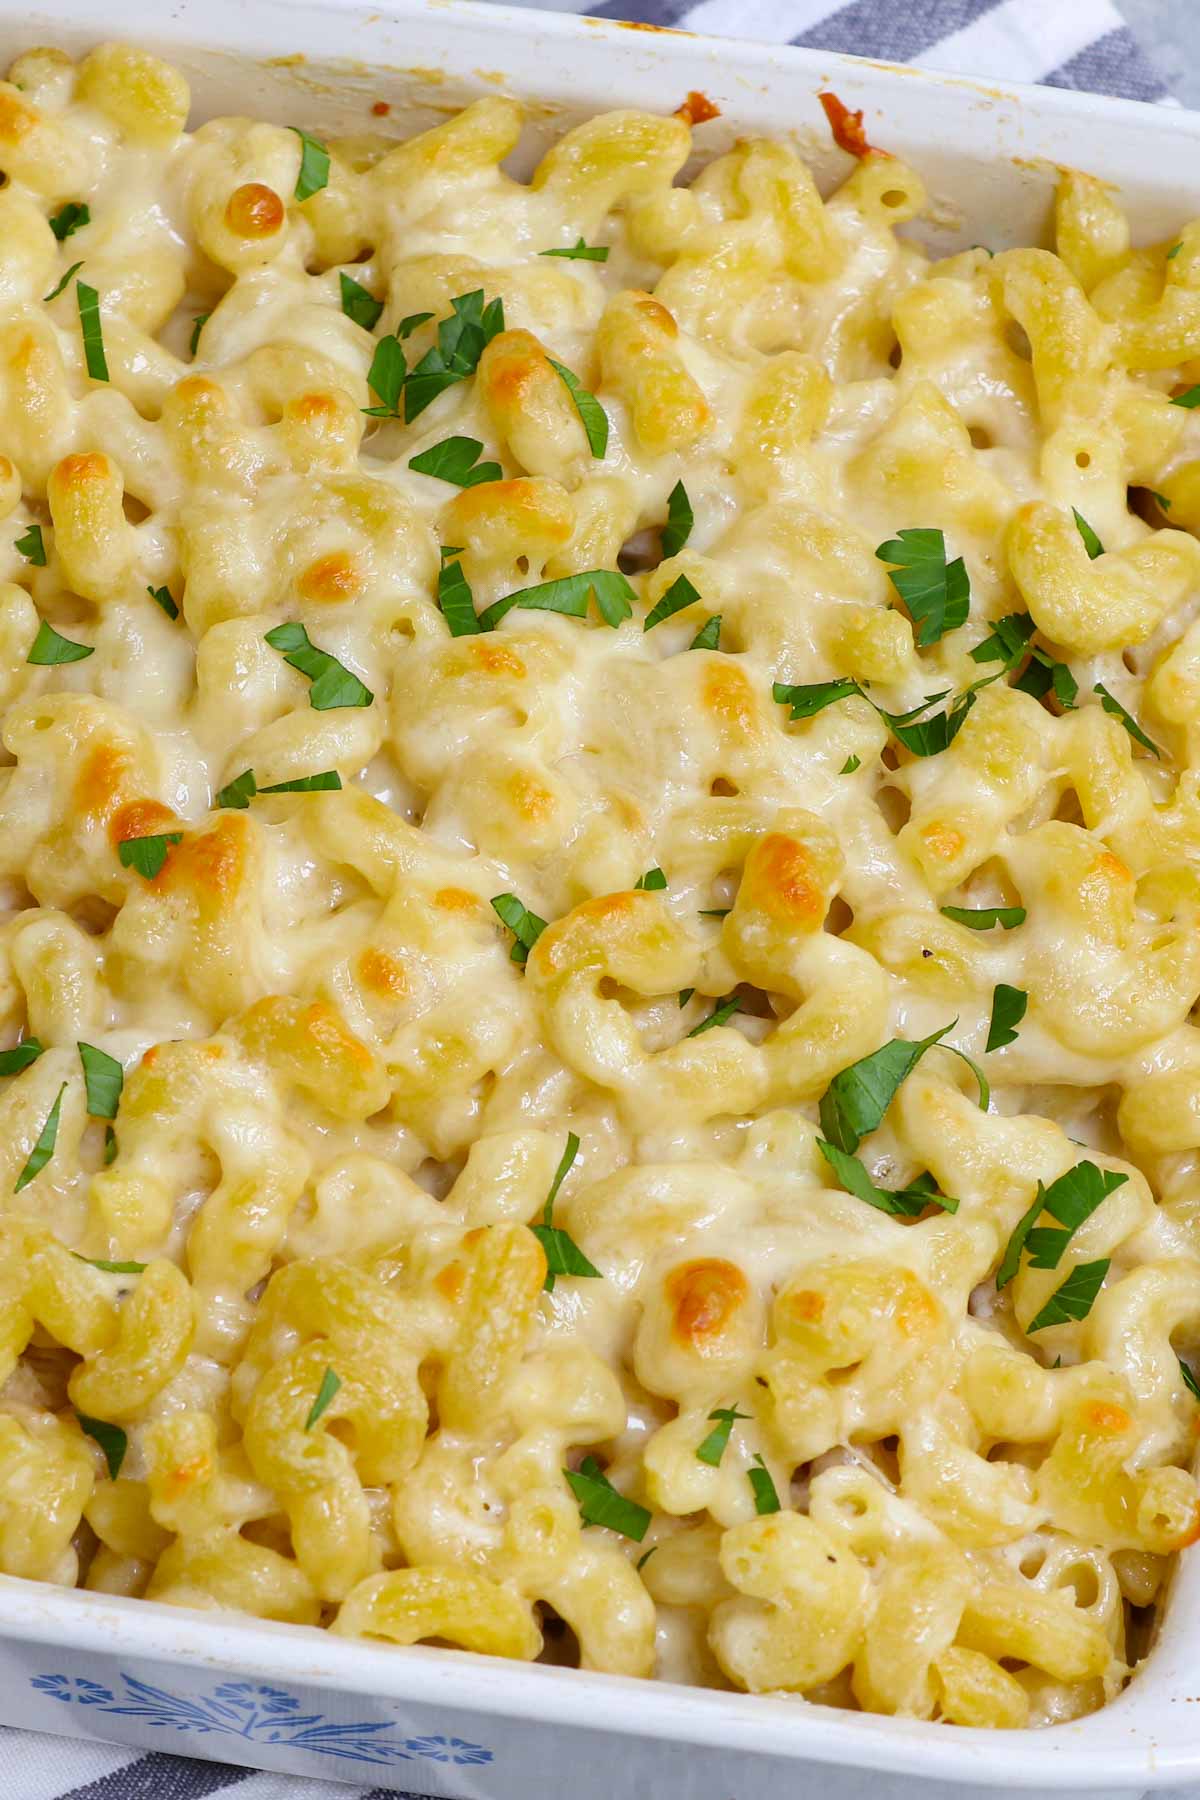 This creamy and cheesy Cavatappi Pasta is a grown-up version of mac and cheese. Also called corkscrew pasta, cavatappi noodles are delicious on its own or served as a side at your next family dinner. I used a homemade cheese sauce to take this recipe over the top!